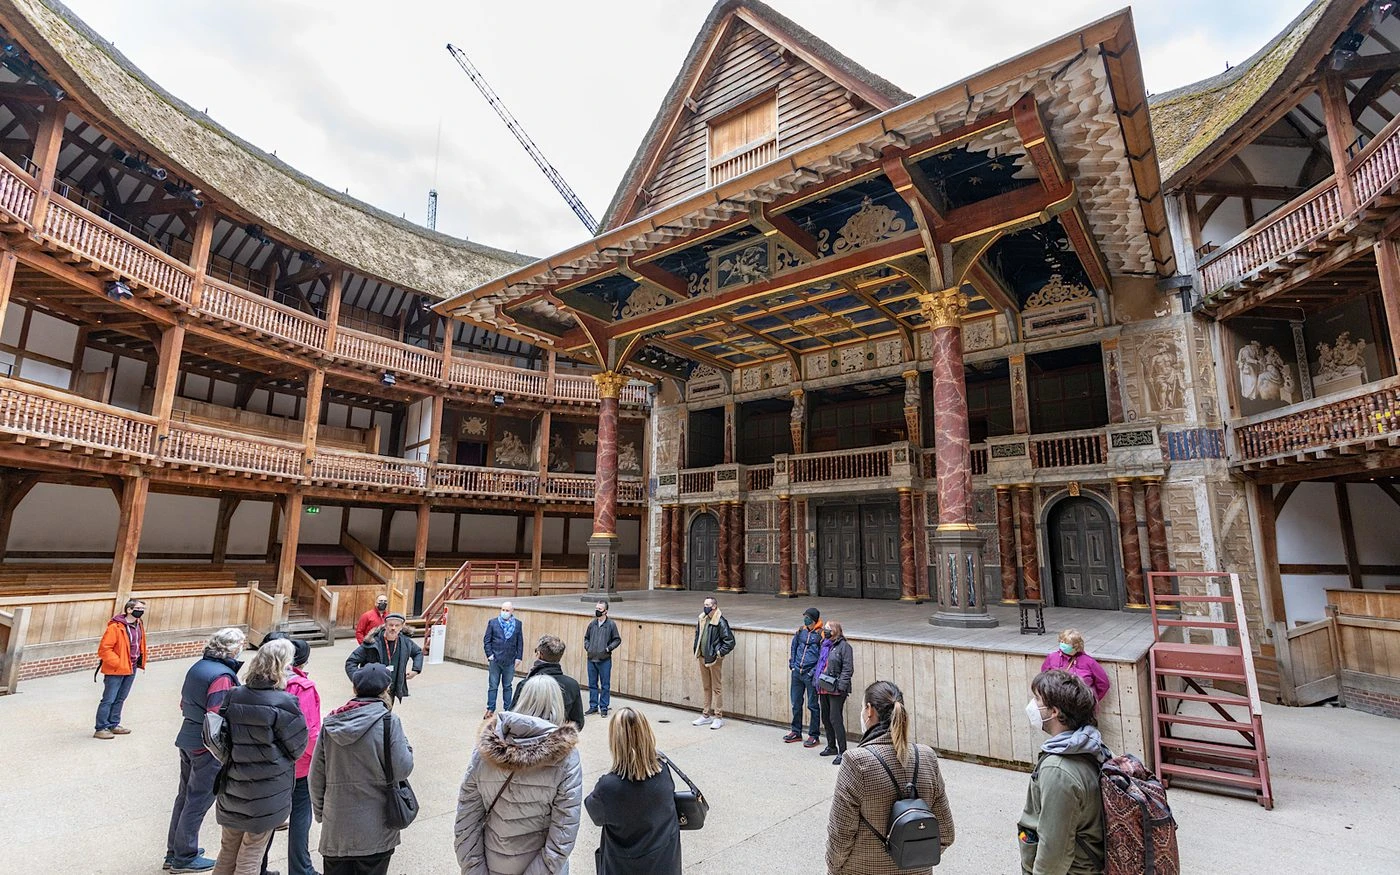 Shakespeare’s Globe Guided Tour: What to expect - 1